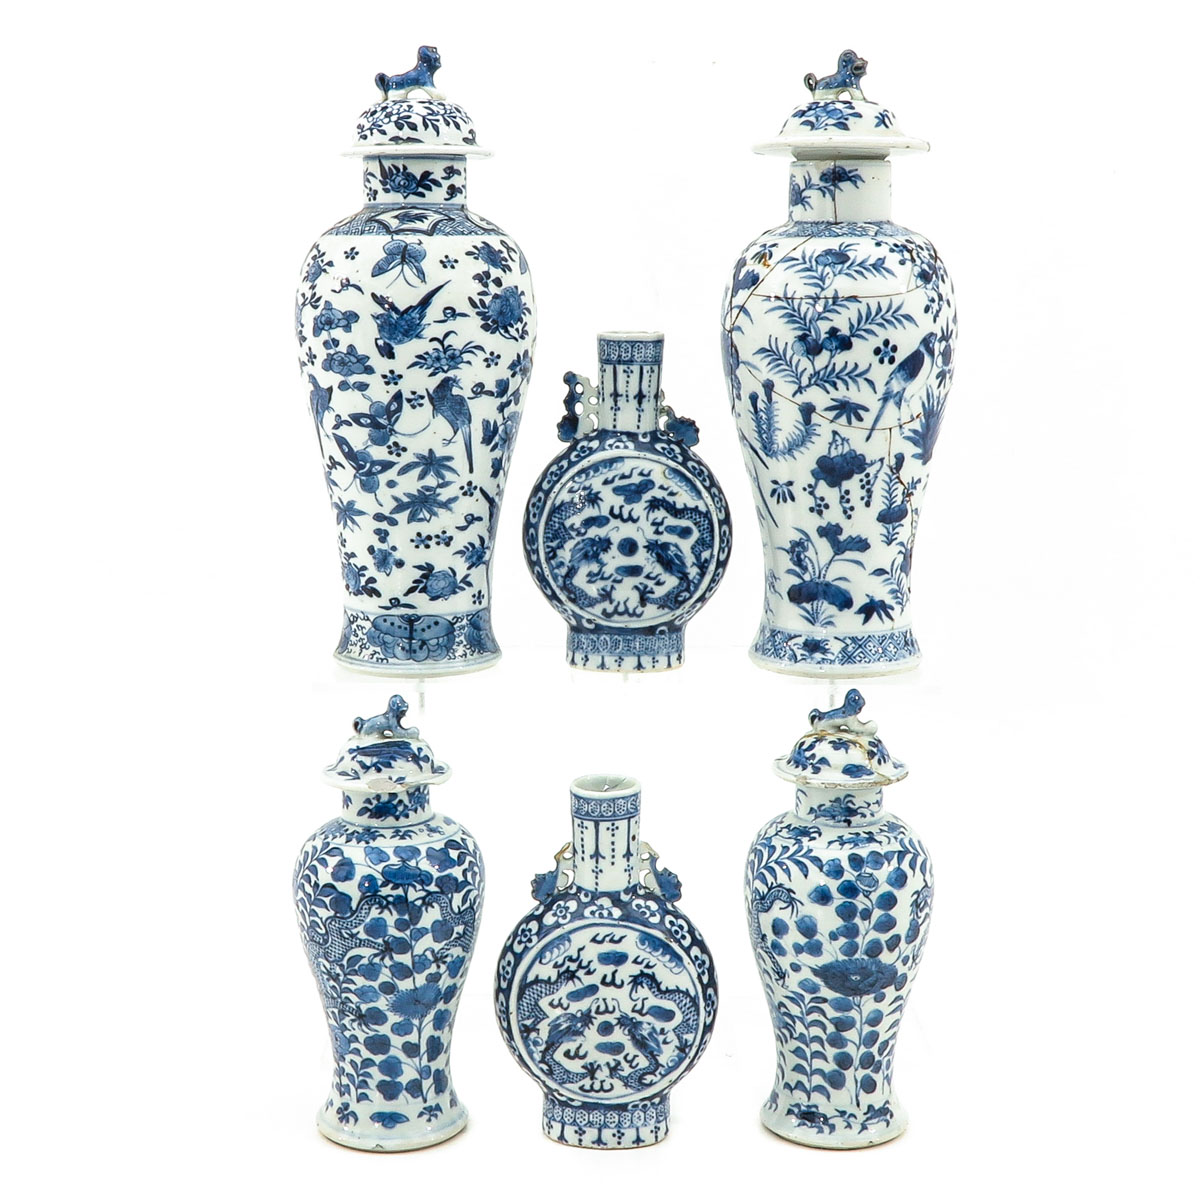 A Collection of 6 Vases - Image 3 of 10